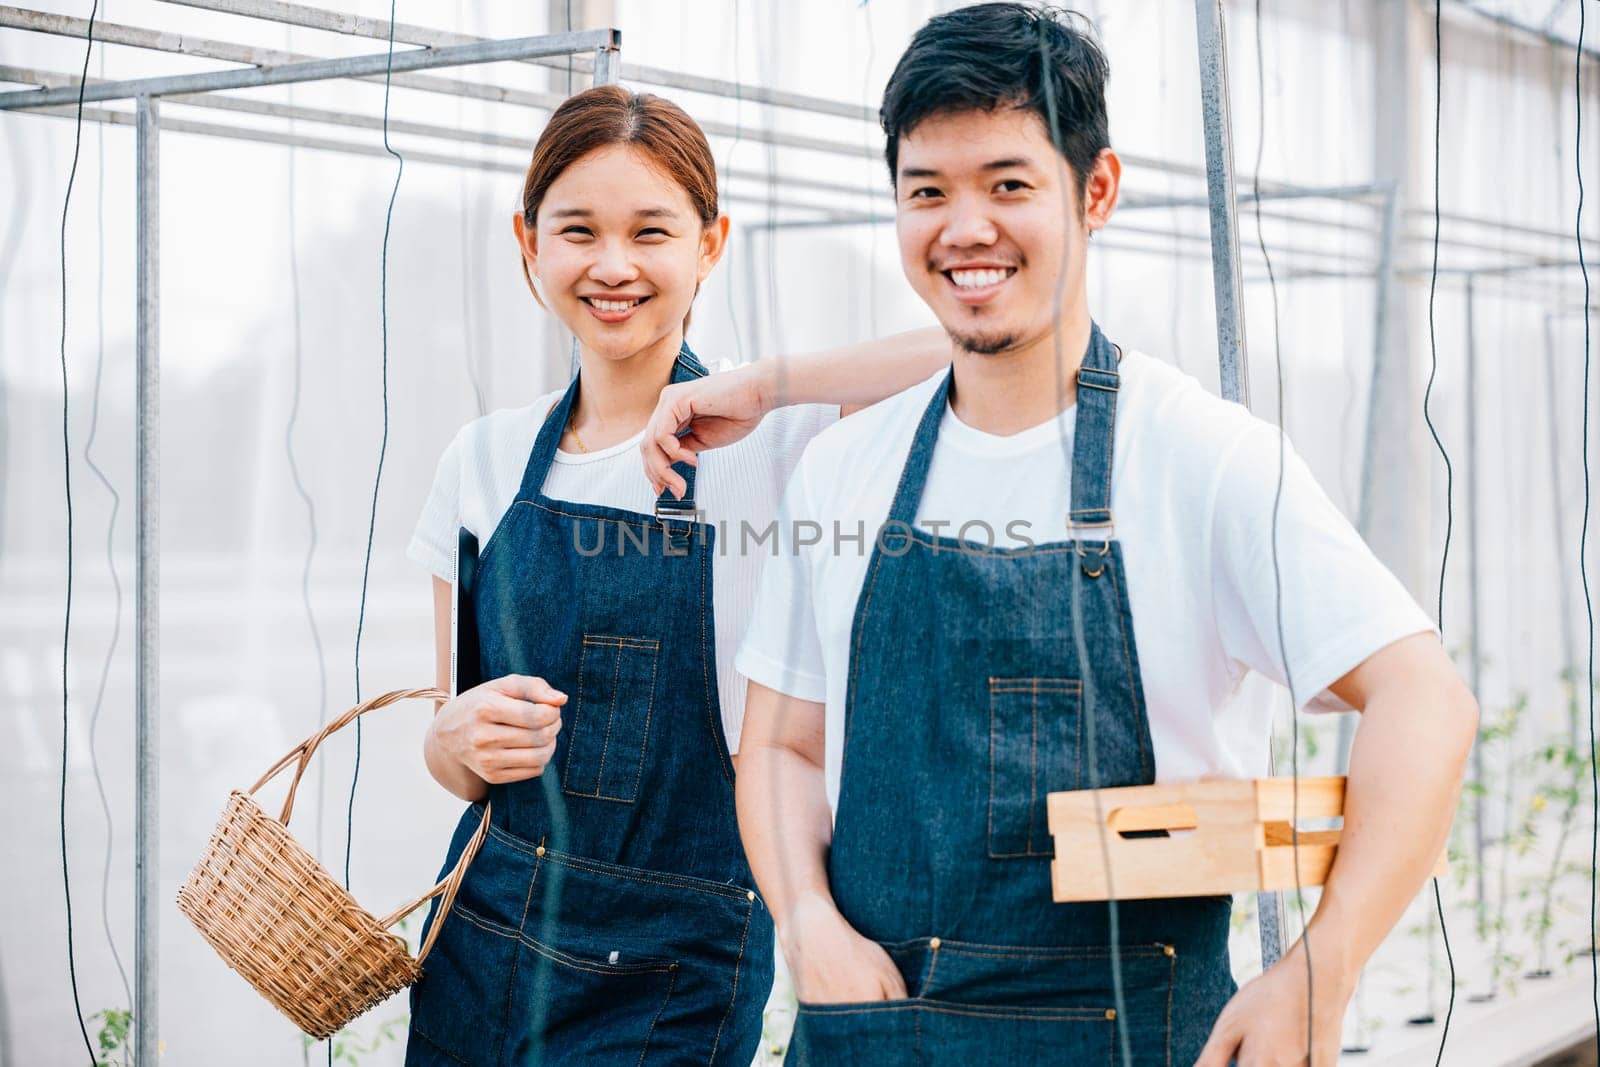 In a greenhouse an Asian woman and man a smiling farming couple hold fresh tomatoes and vegetables. Their portrait reflects joy and confidence in their occupation emphasizing nature bountiful growth.